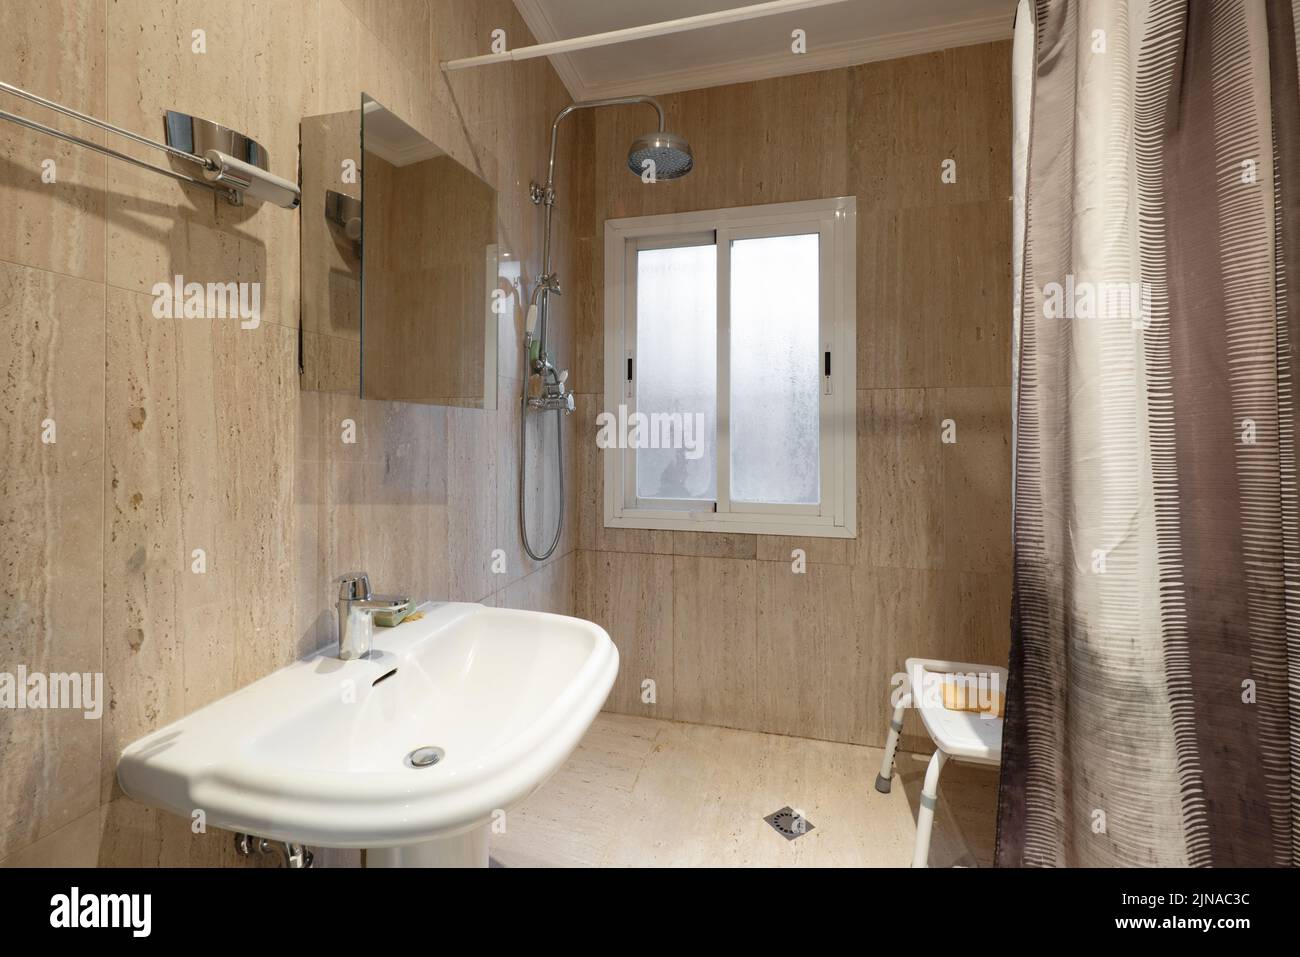 Bathroom with white porcelain sink, marble tiles and shower with seat Stock Photo